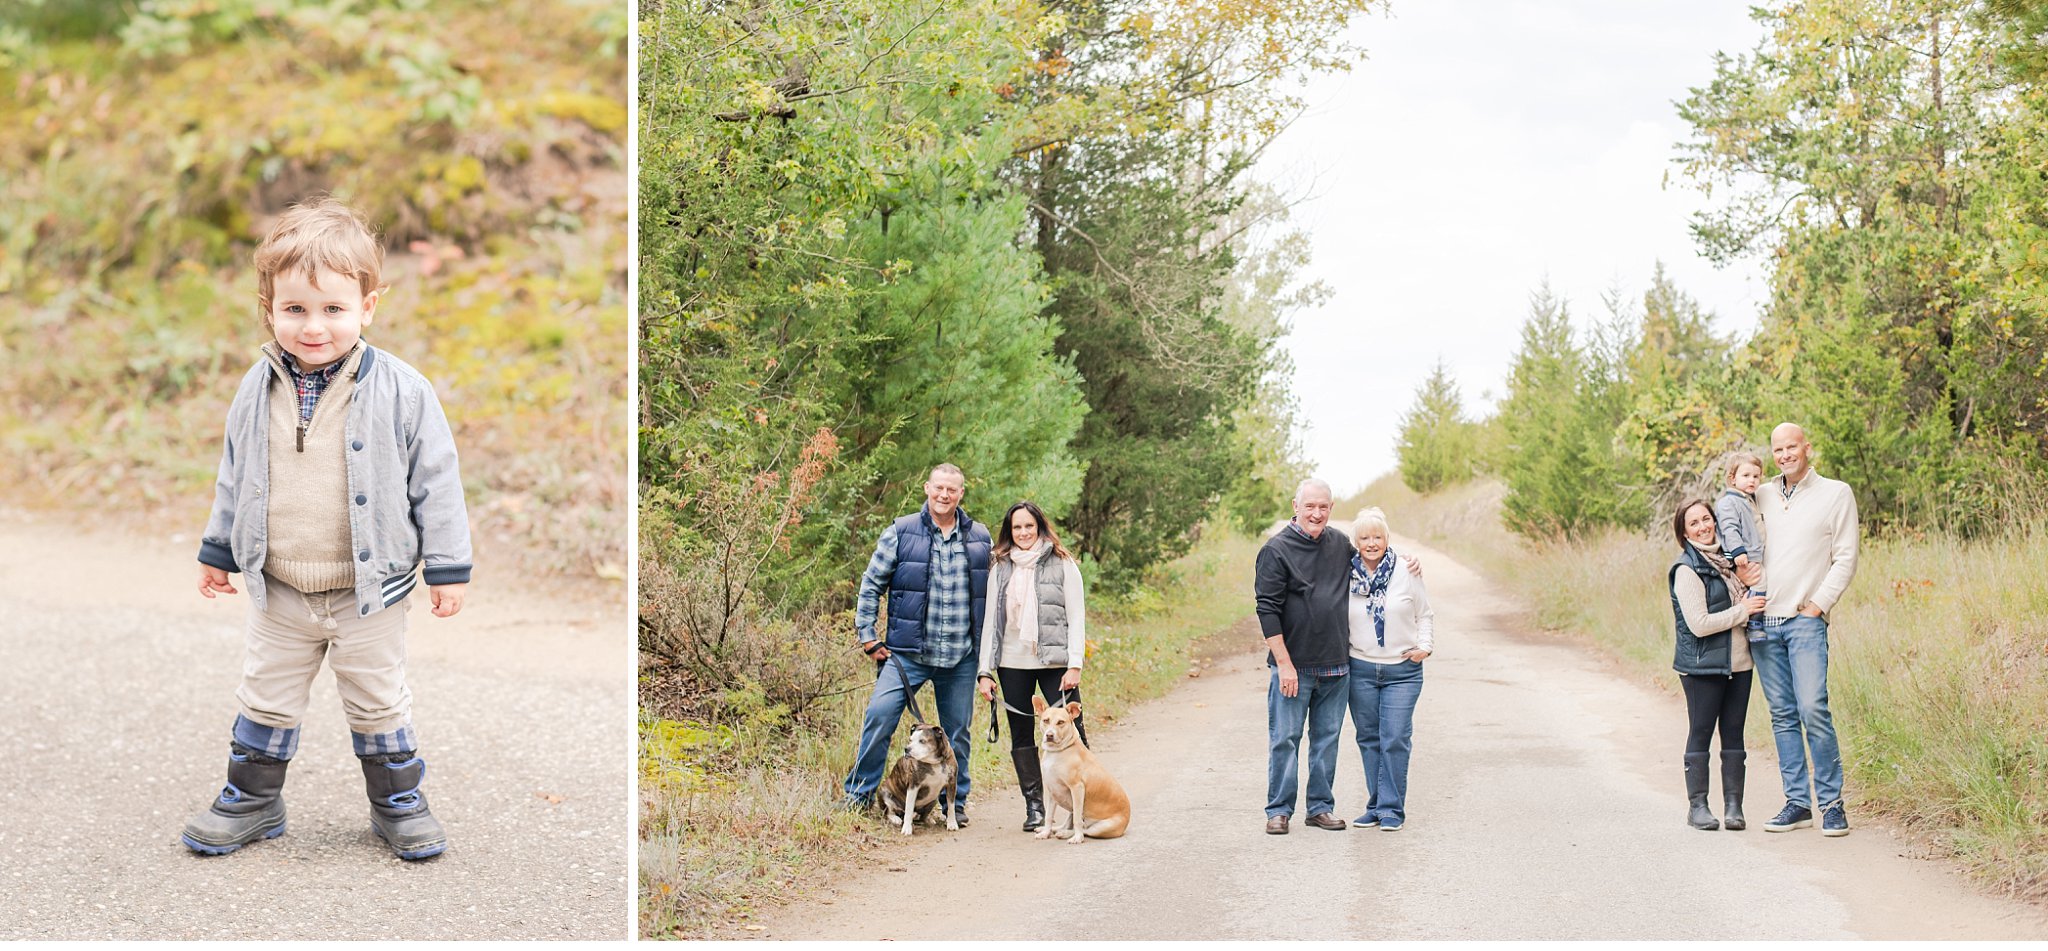 family at pinery provincial park for their family portrait session